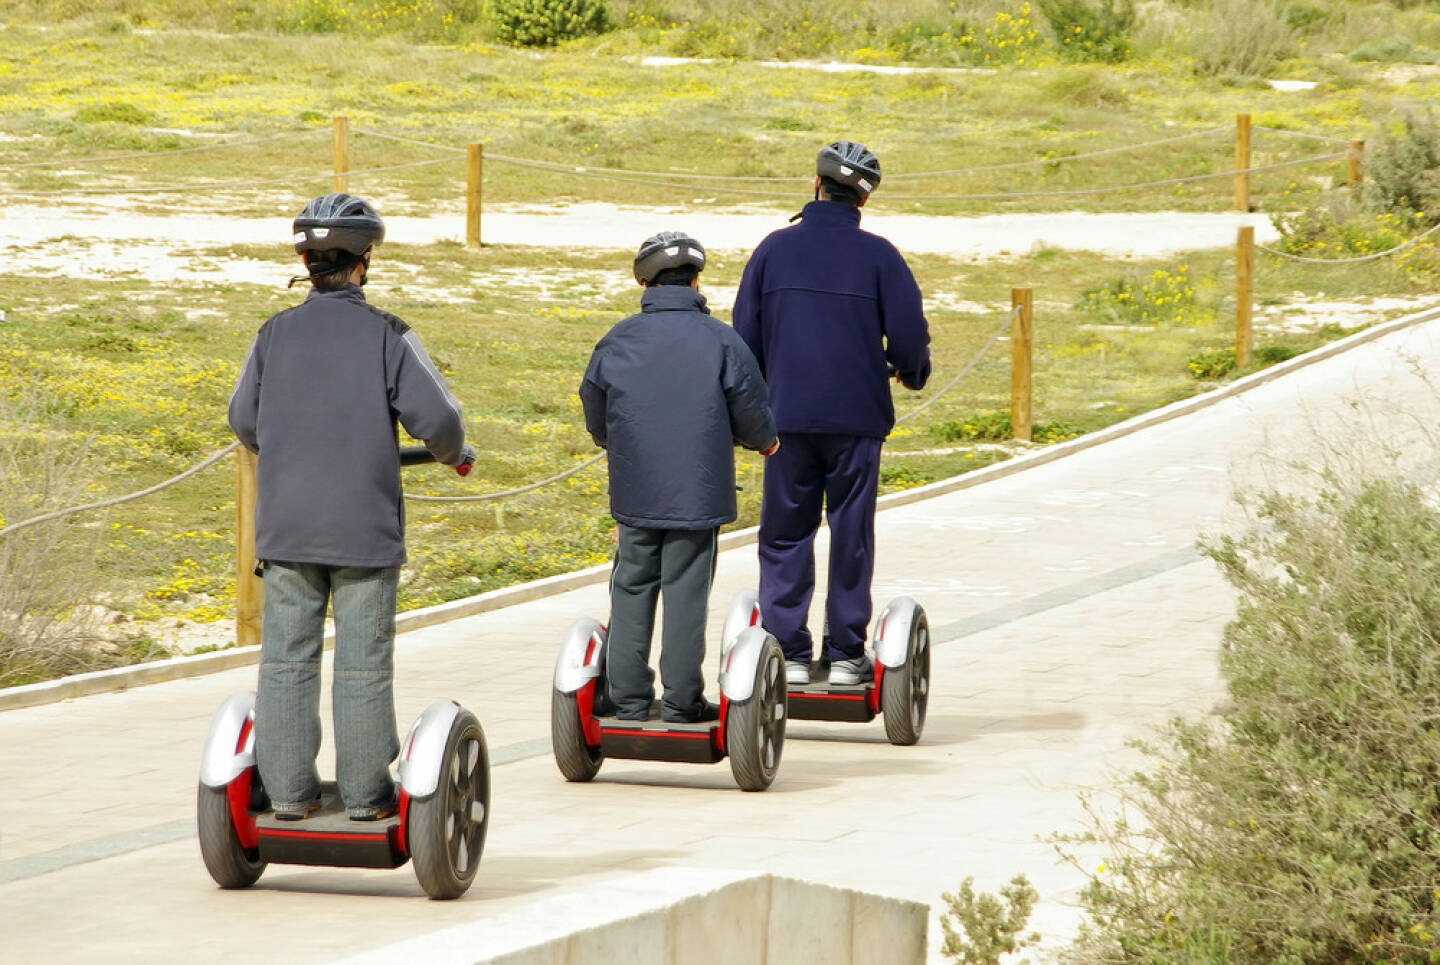 Segway, http://www.shutterstock.com/de/pic-13531789/stock-photo-several-people-moving-over-a-modern-omnidirectional-personal-transport-platform-segway.html 